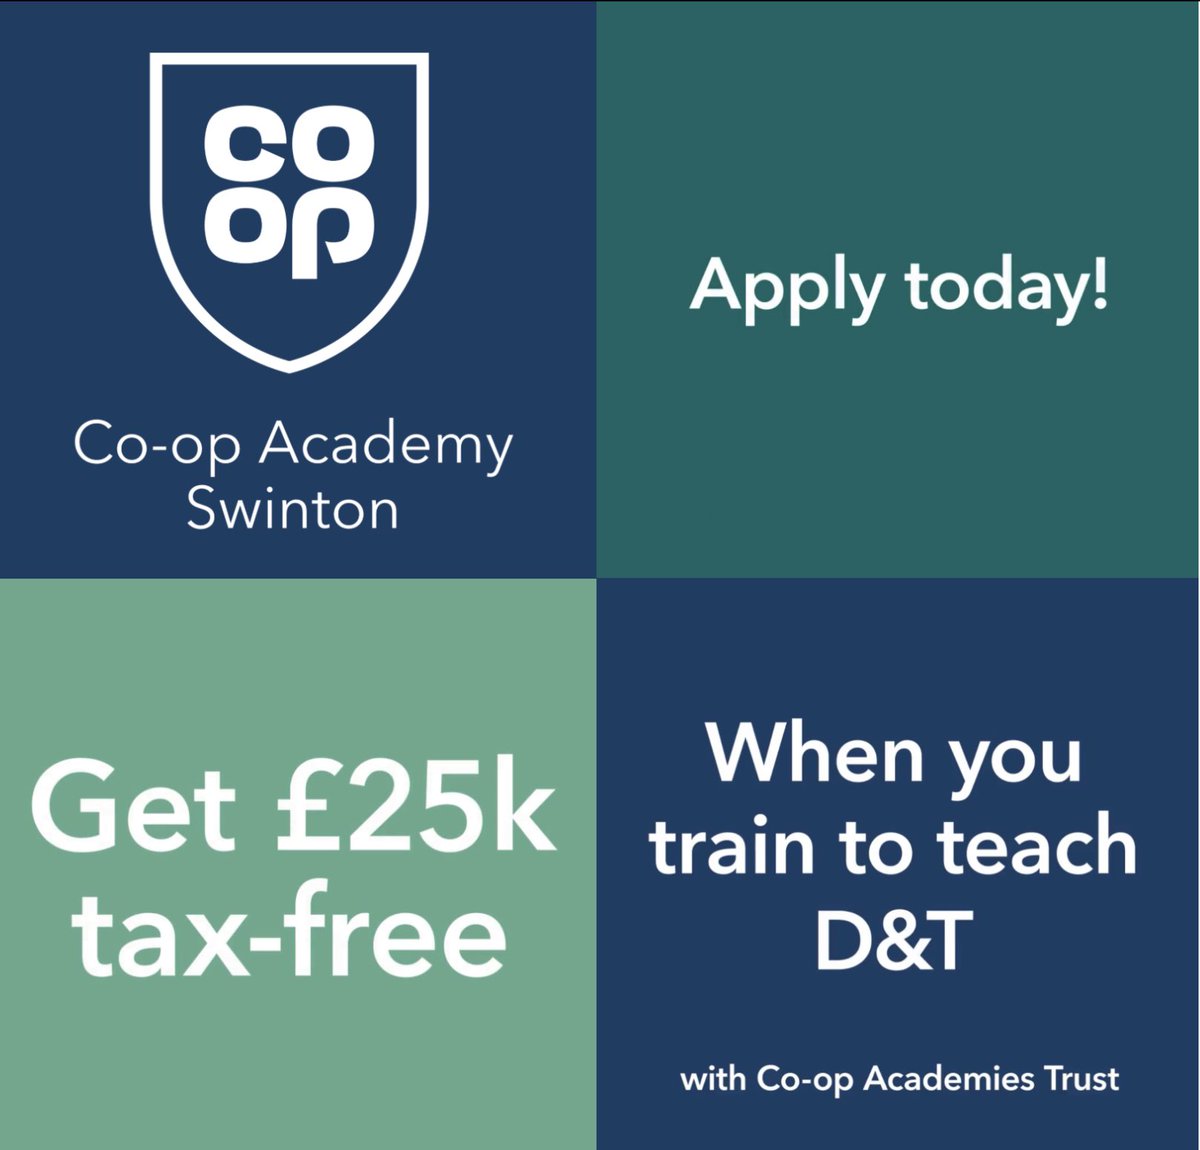 Great news for @CoopAcademies where, once again, we have shown our commitment to recruiting our trainee teachers! 
Darren (D&T) with @Coopacademy has been successful in securing an ECT position with @zarinaali172 @swintoncoop for Sept 24. This is what #succeedtogether looks like!